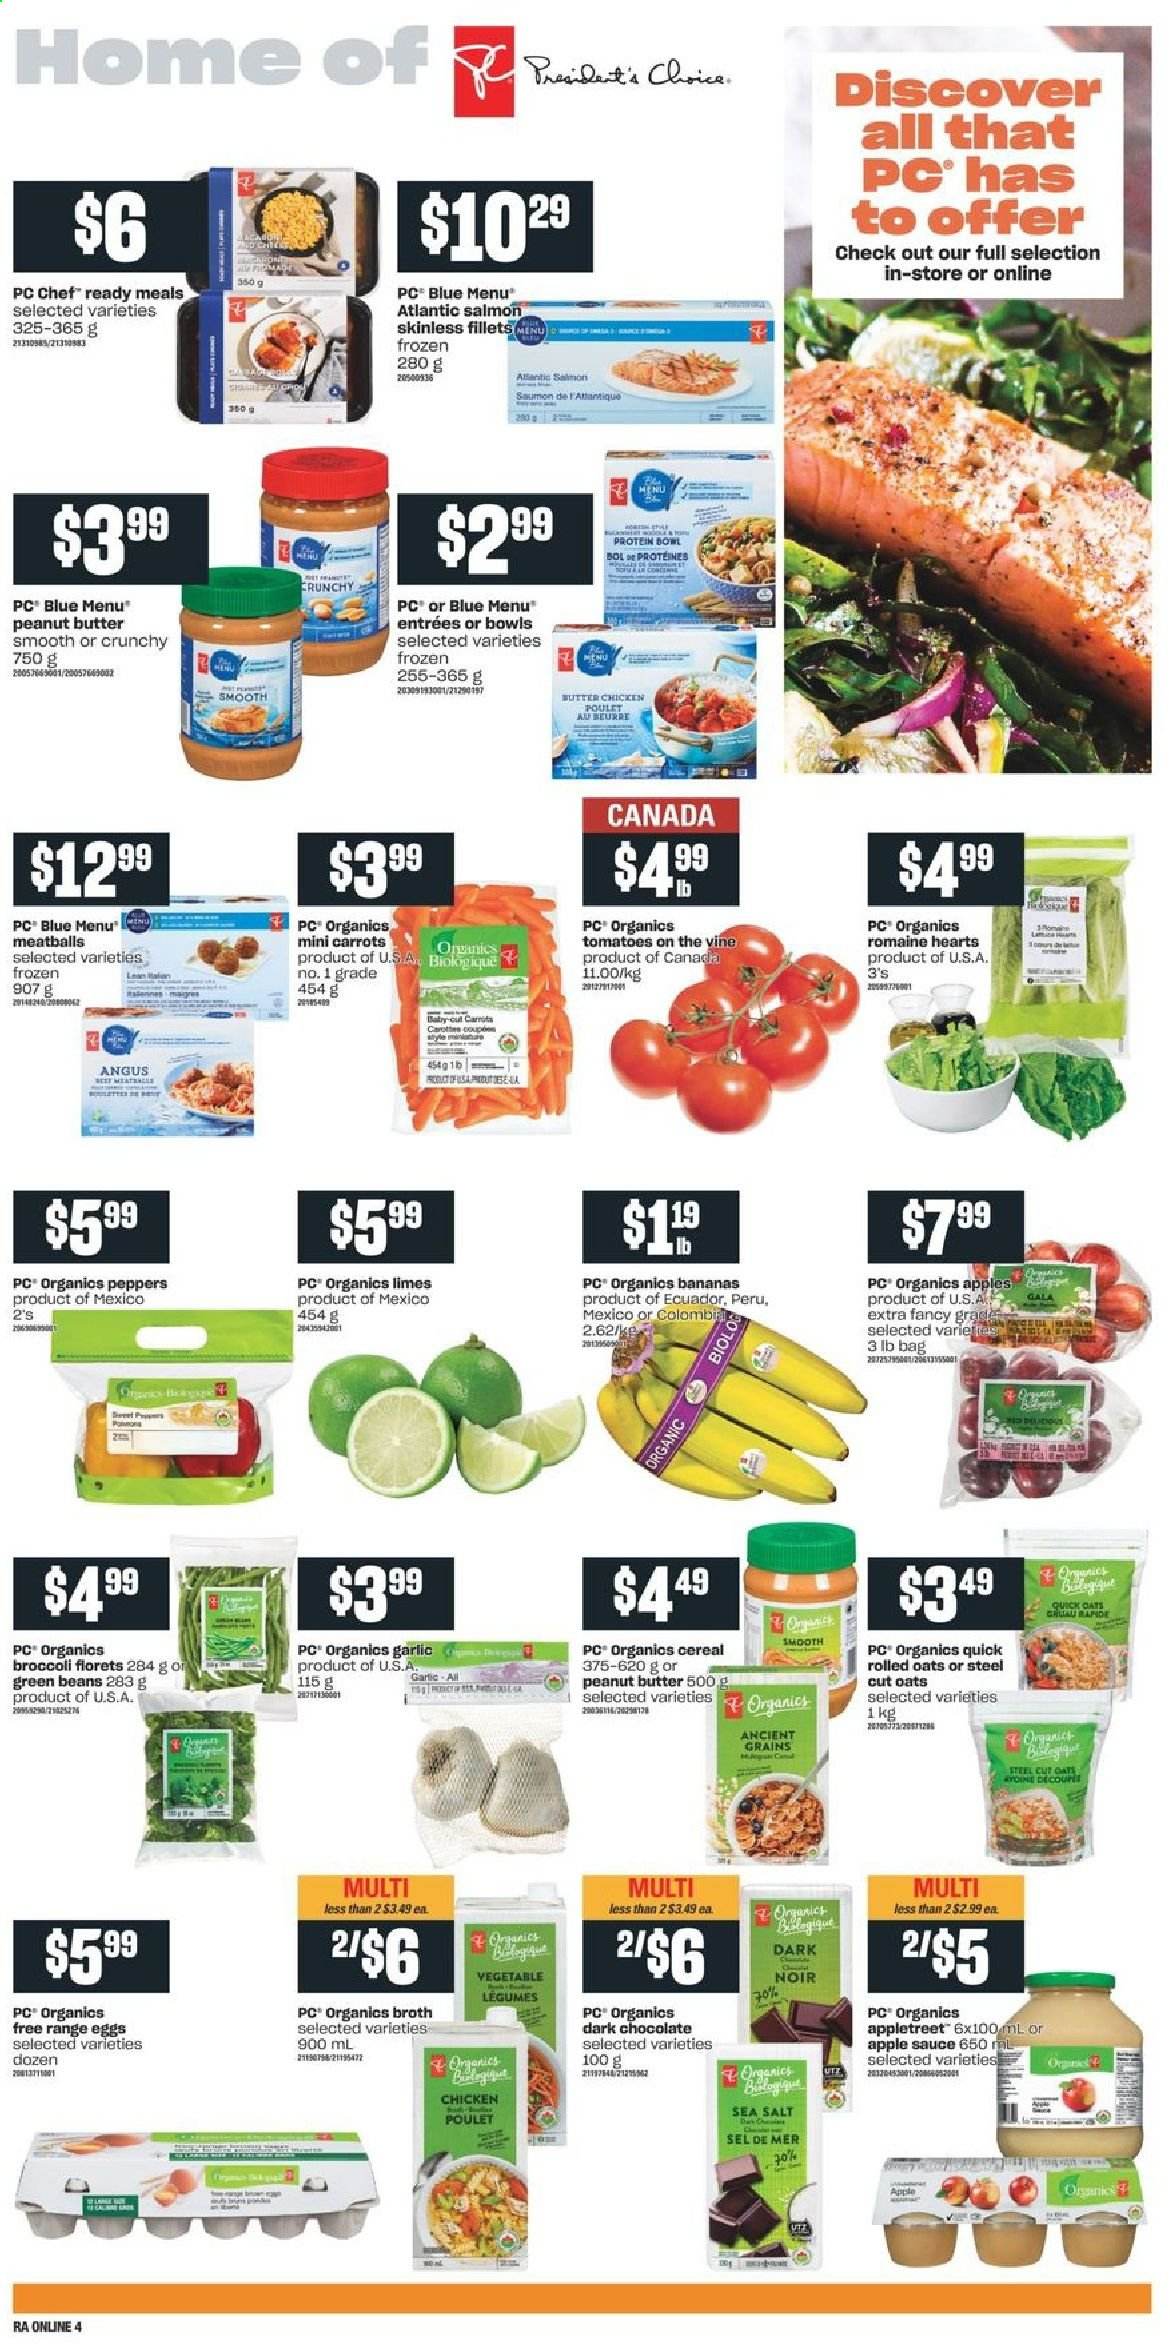 thumbnail - Atlantic Superstore Flyer - January 14, 2021 - January 20, 2021 - Sales products - beans, broccoli, carrots, garlic, green beans, tomatoes, peppers, bananas, Gala, limes, salmon, meatballs, sauce, eggs, chocolate, dark chocolate, oats, broth, cereals, rolled oats, Quick Oats, apple sauce, peanut butter, bag. Page 8.